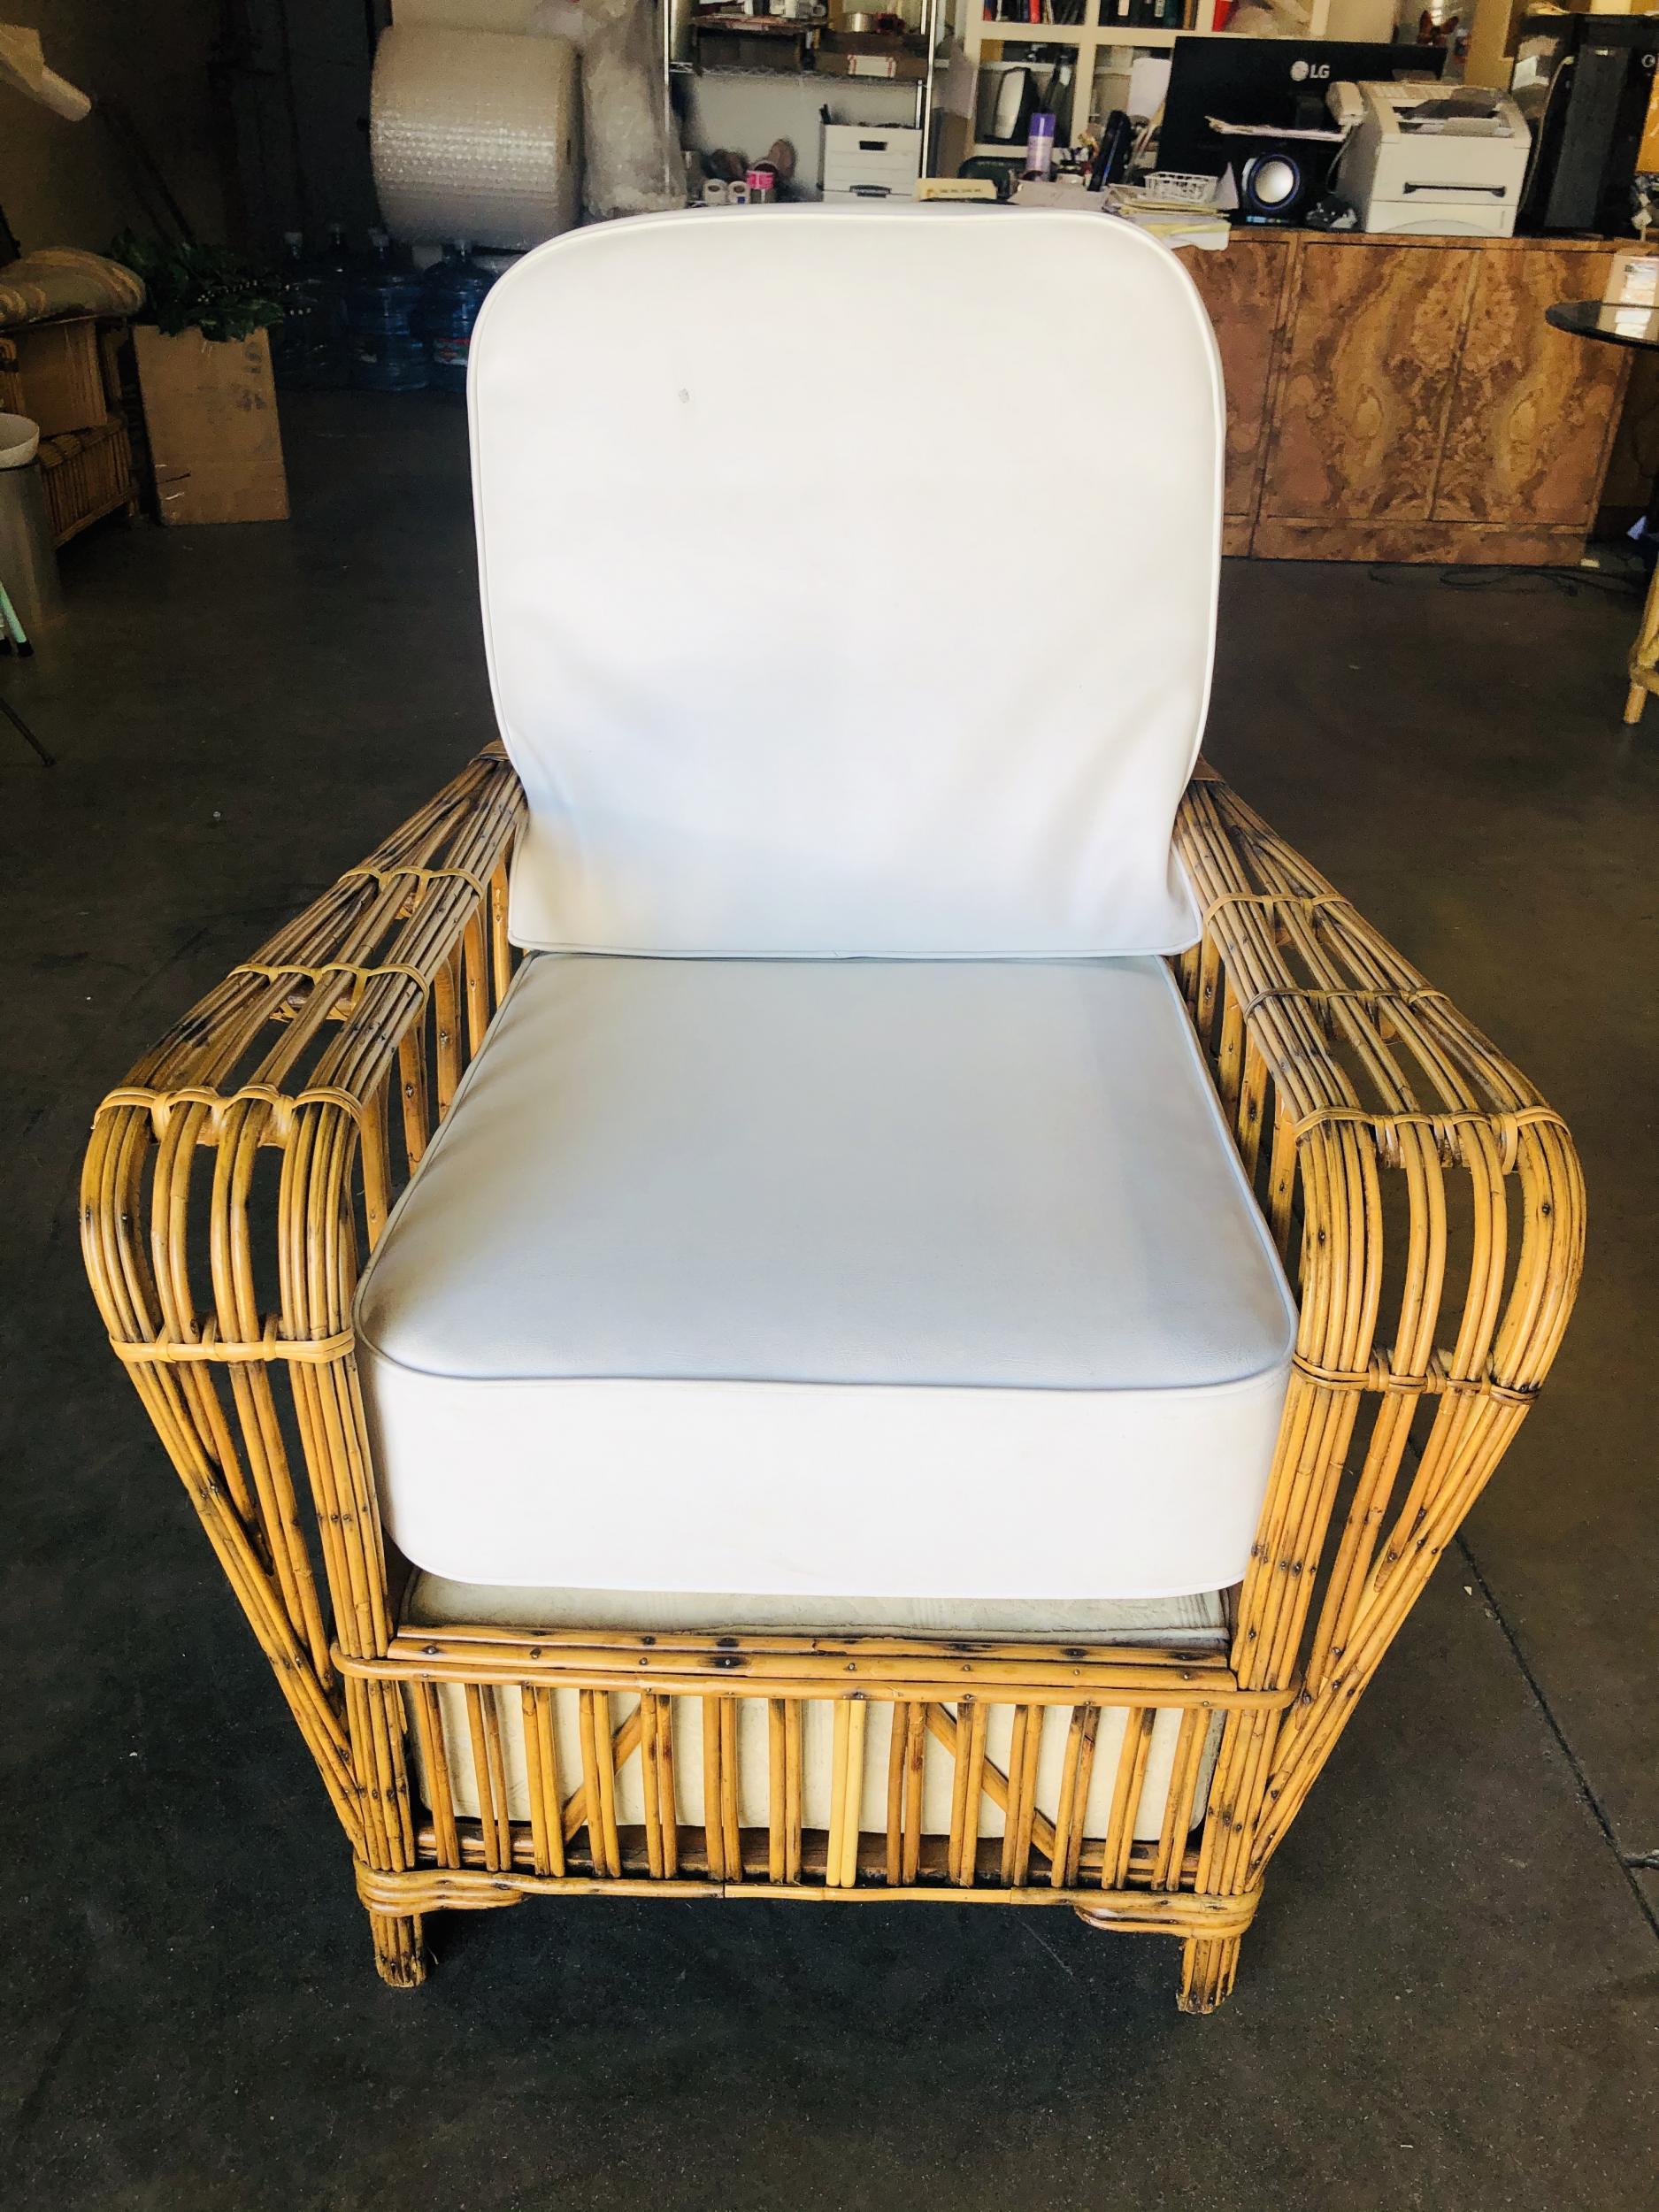 This Art Deco era rattan lounge chair with multi-strand stick rattan arms forming a Gothic cathedral style arches along the side with a tombstone seat back.

Custom cushions are included in the price. Simply supply the fabric and we have the